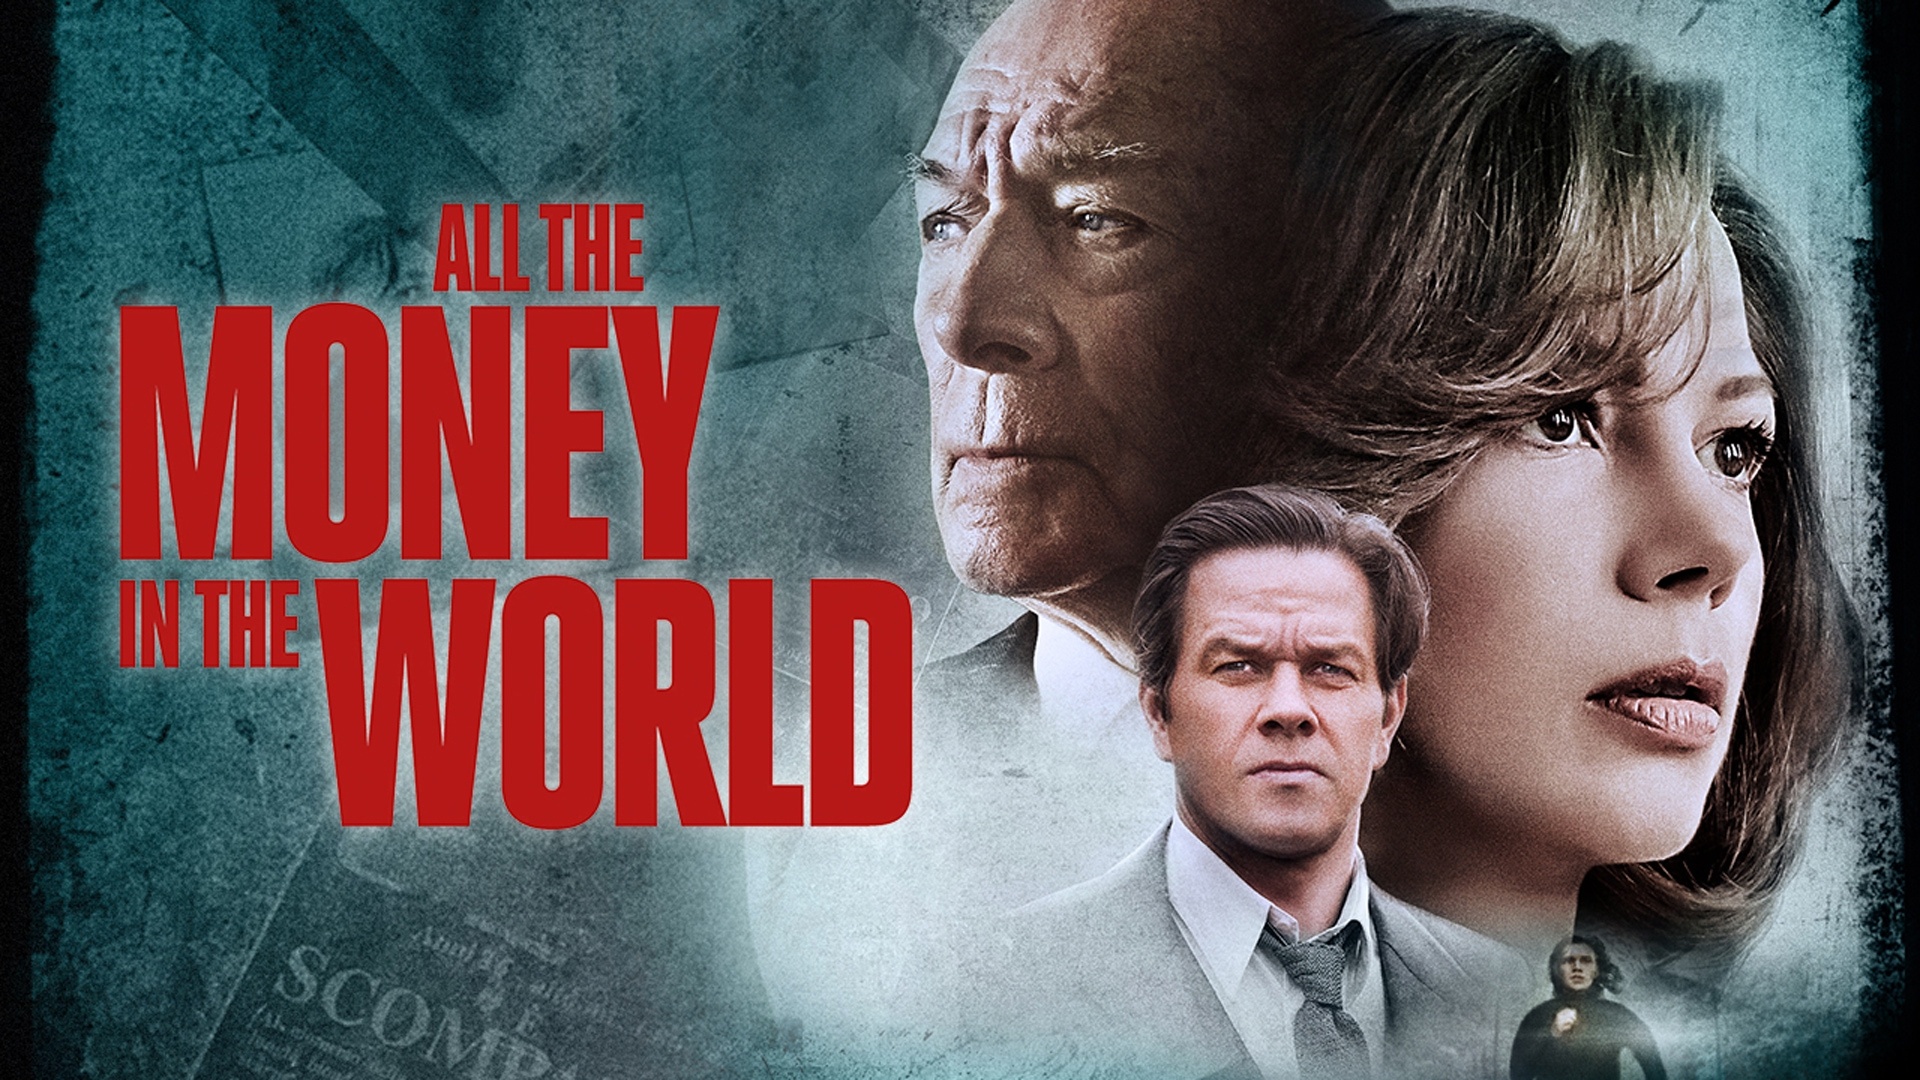 Watch Money in the World, Online streaming, HD quality, Movies on Stan, 1920x1080 Full HD Desktop